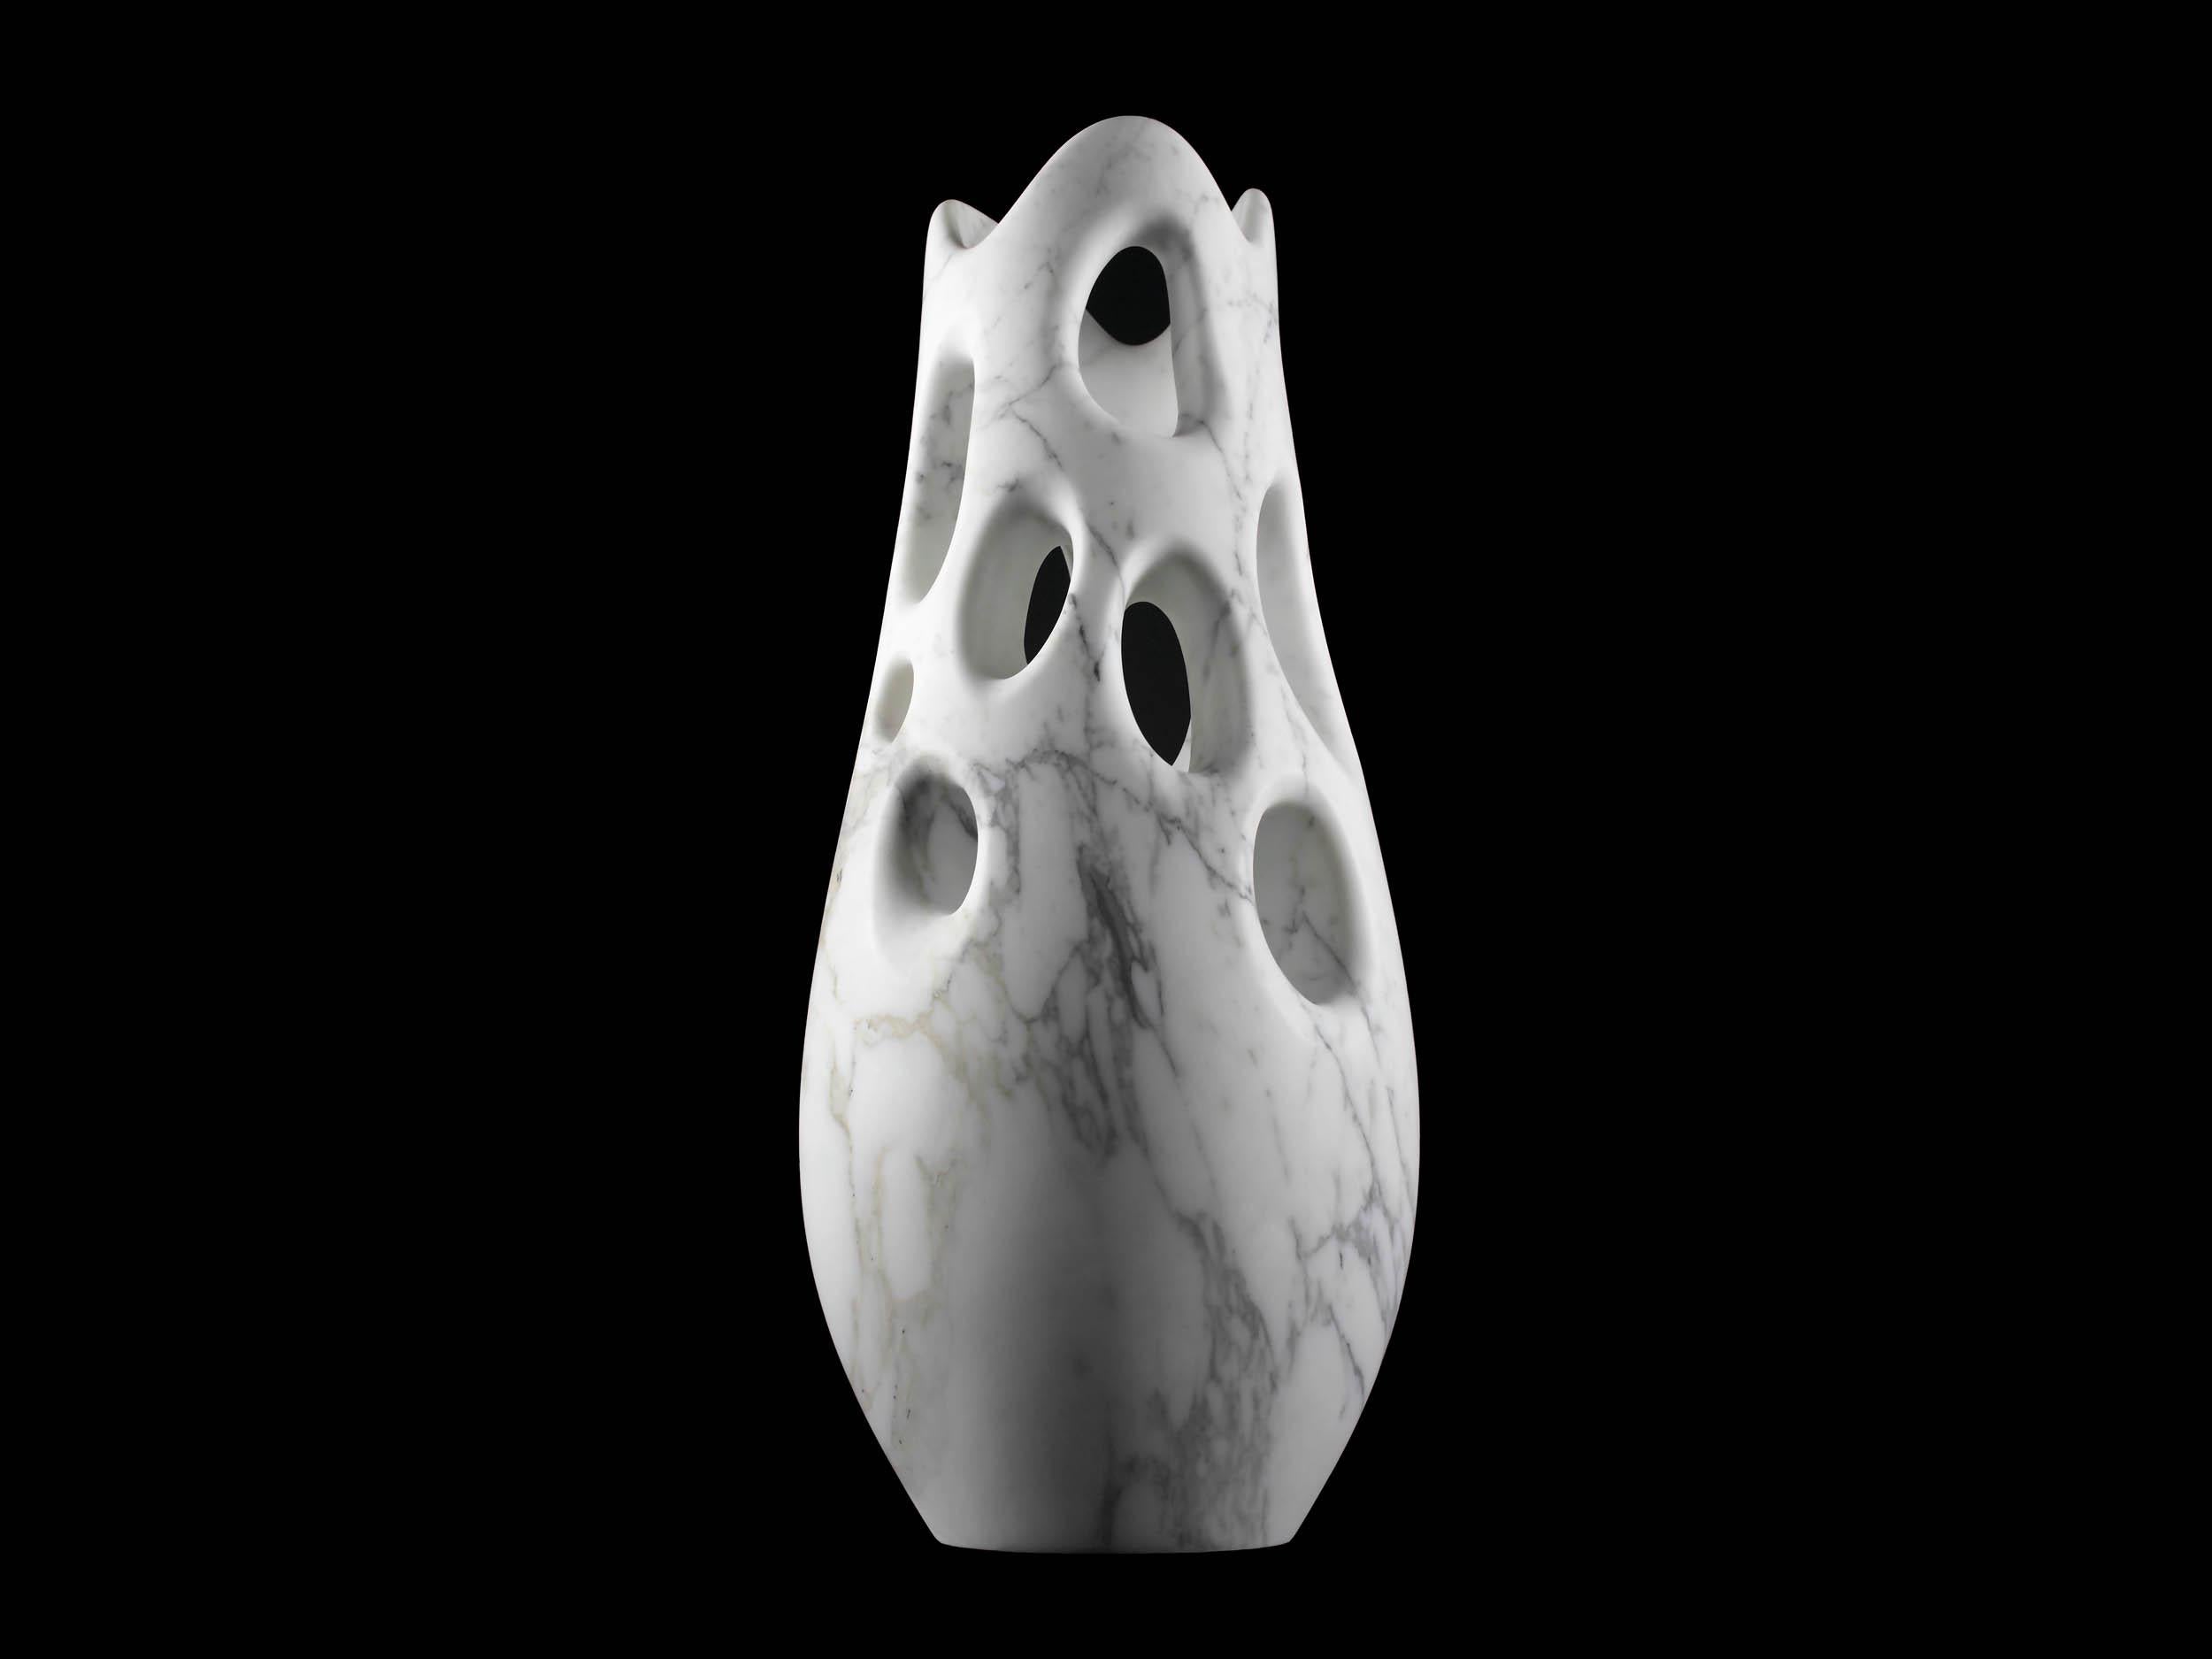 Vase Vessel Decorative Abstract Sculpture Organic Shape White Marble Hand-carved In New Condition For Sale In Ancona, Marche